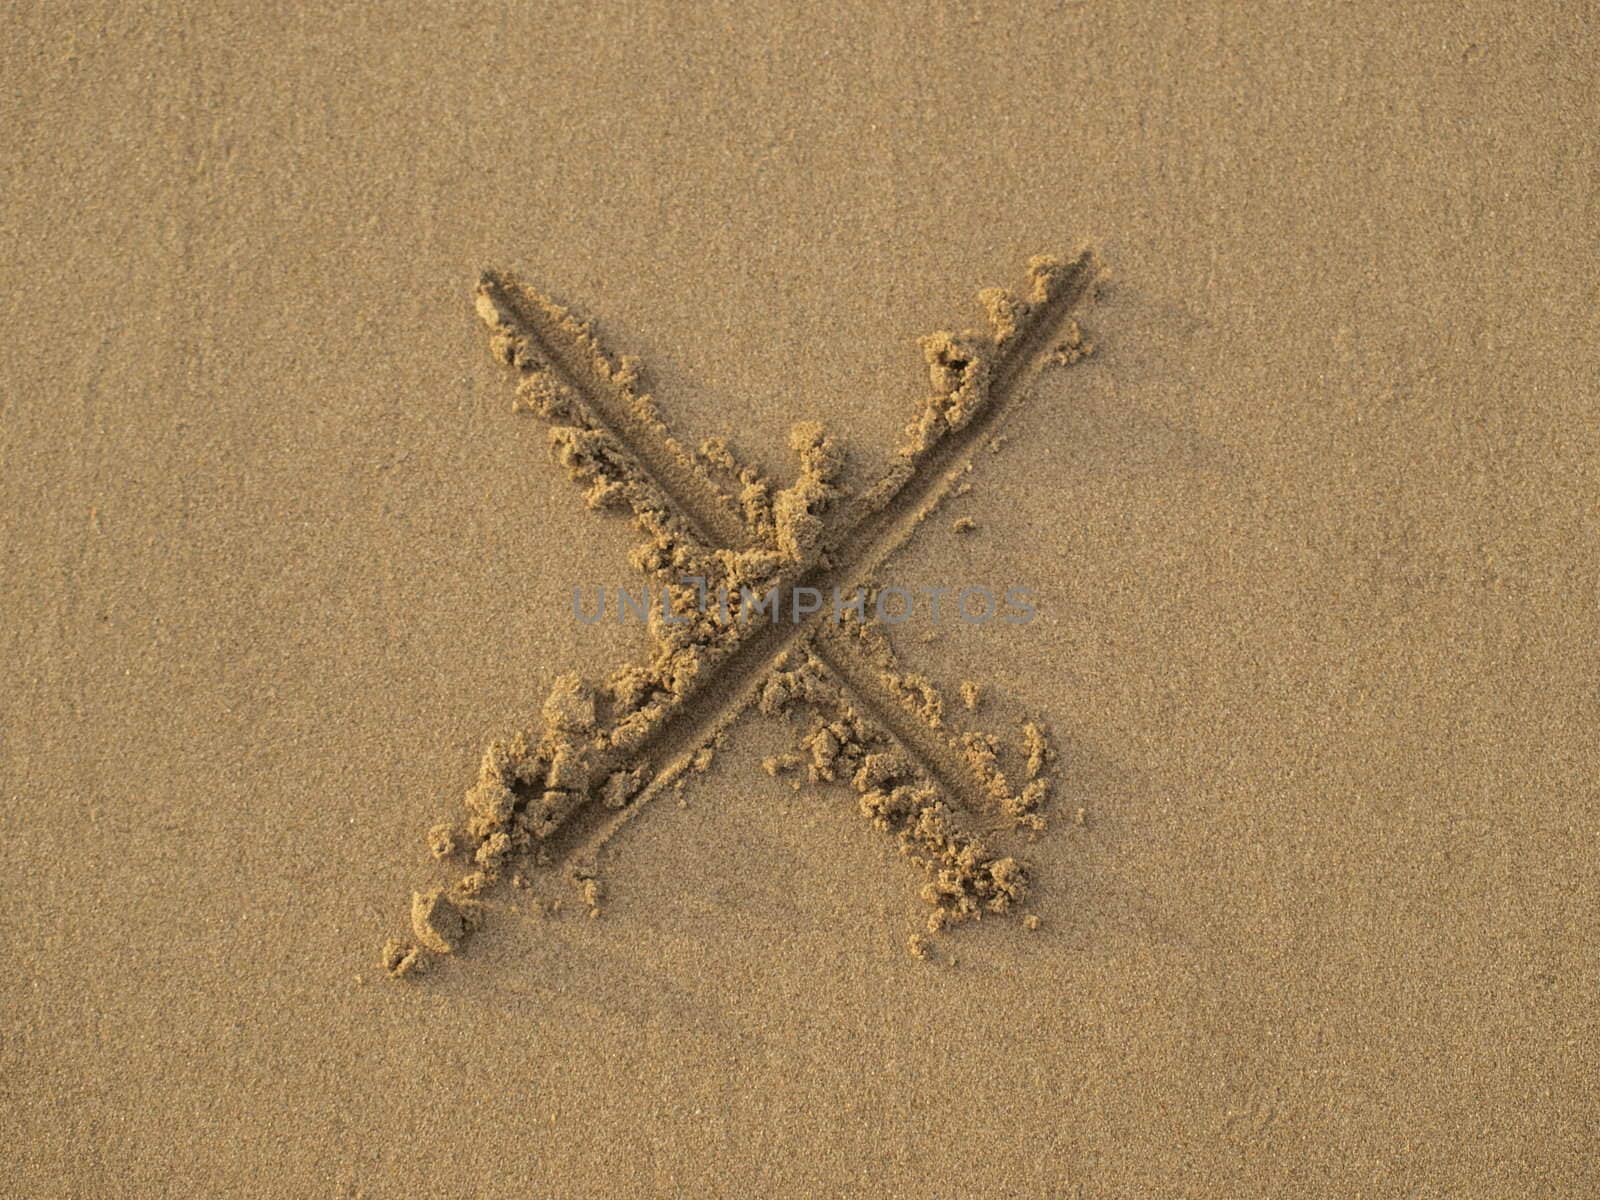 Cross sign drawn on sand by Alminaite